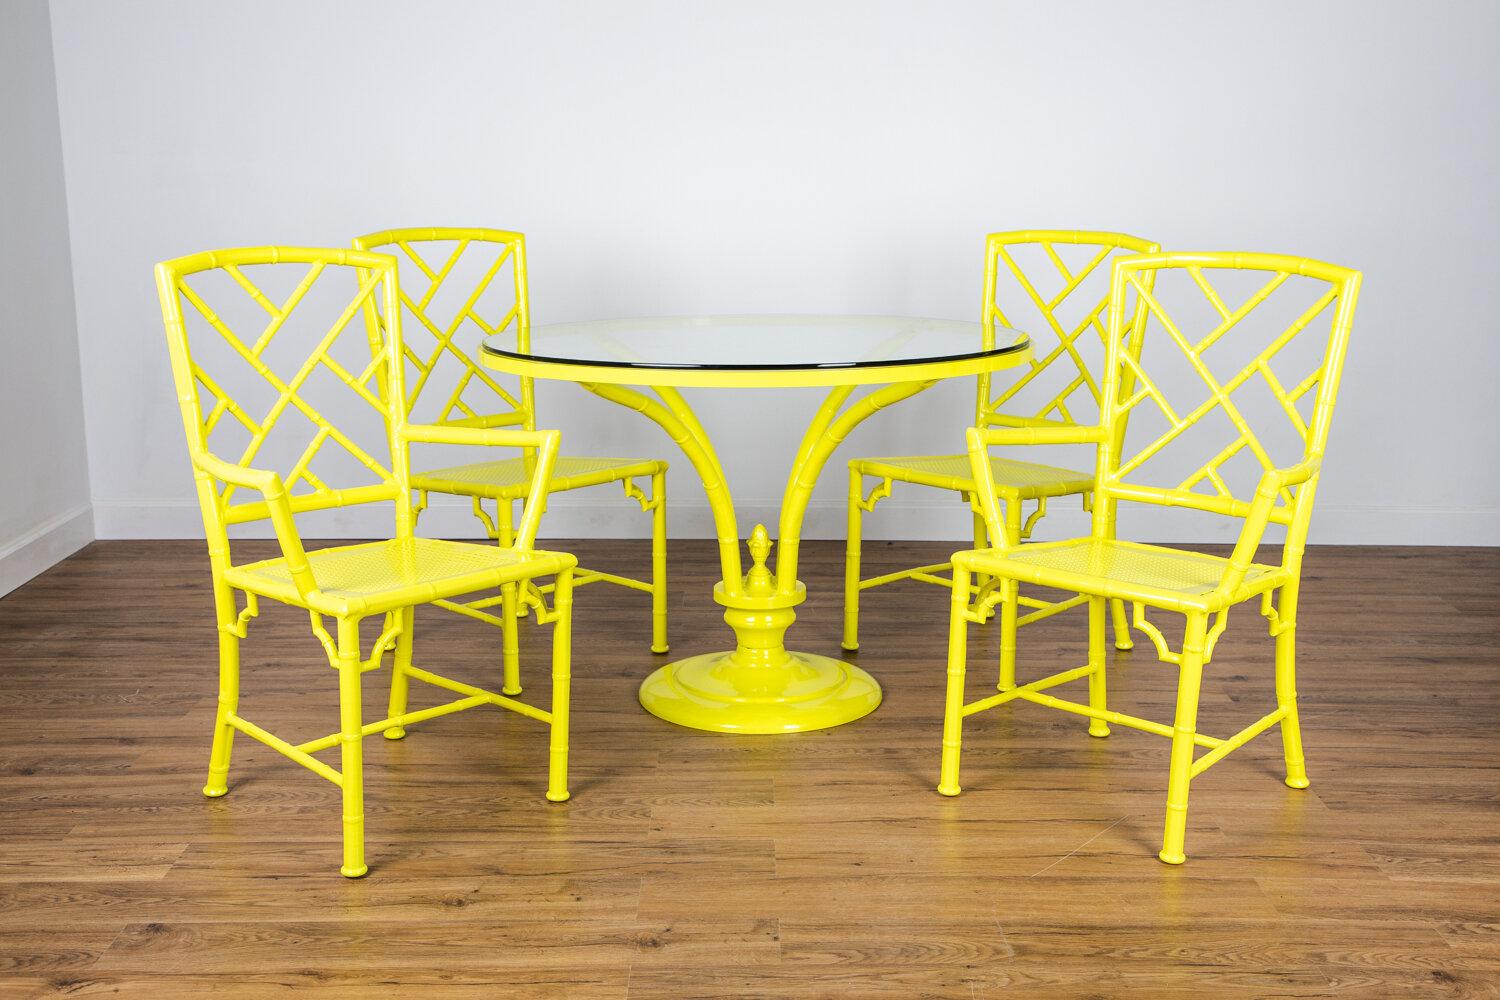 Urbagevintage Meadowcraft Faux Bamboo Bistro Set In Gloss Yellow Powder Coat - Vintage Faux Bamboo Patio Furniture